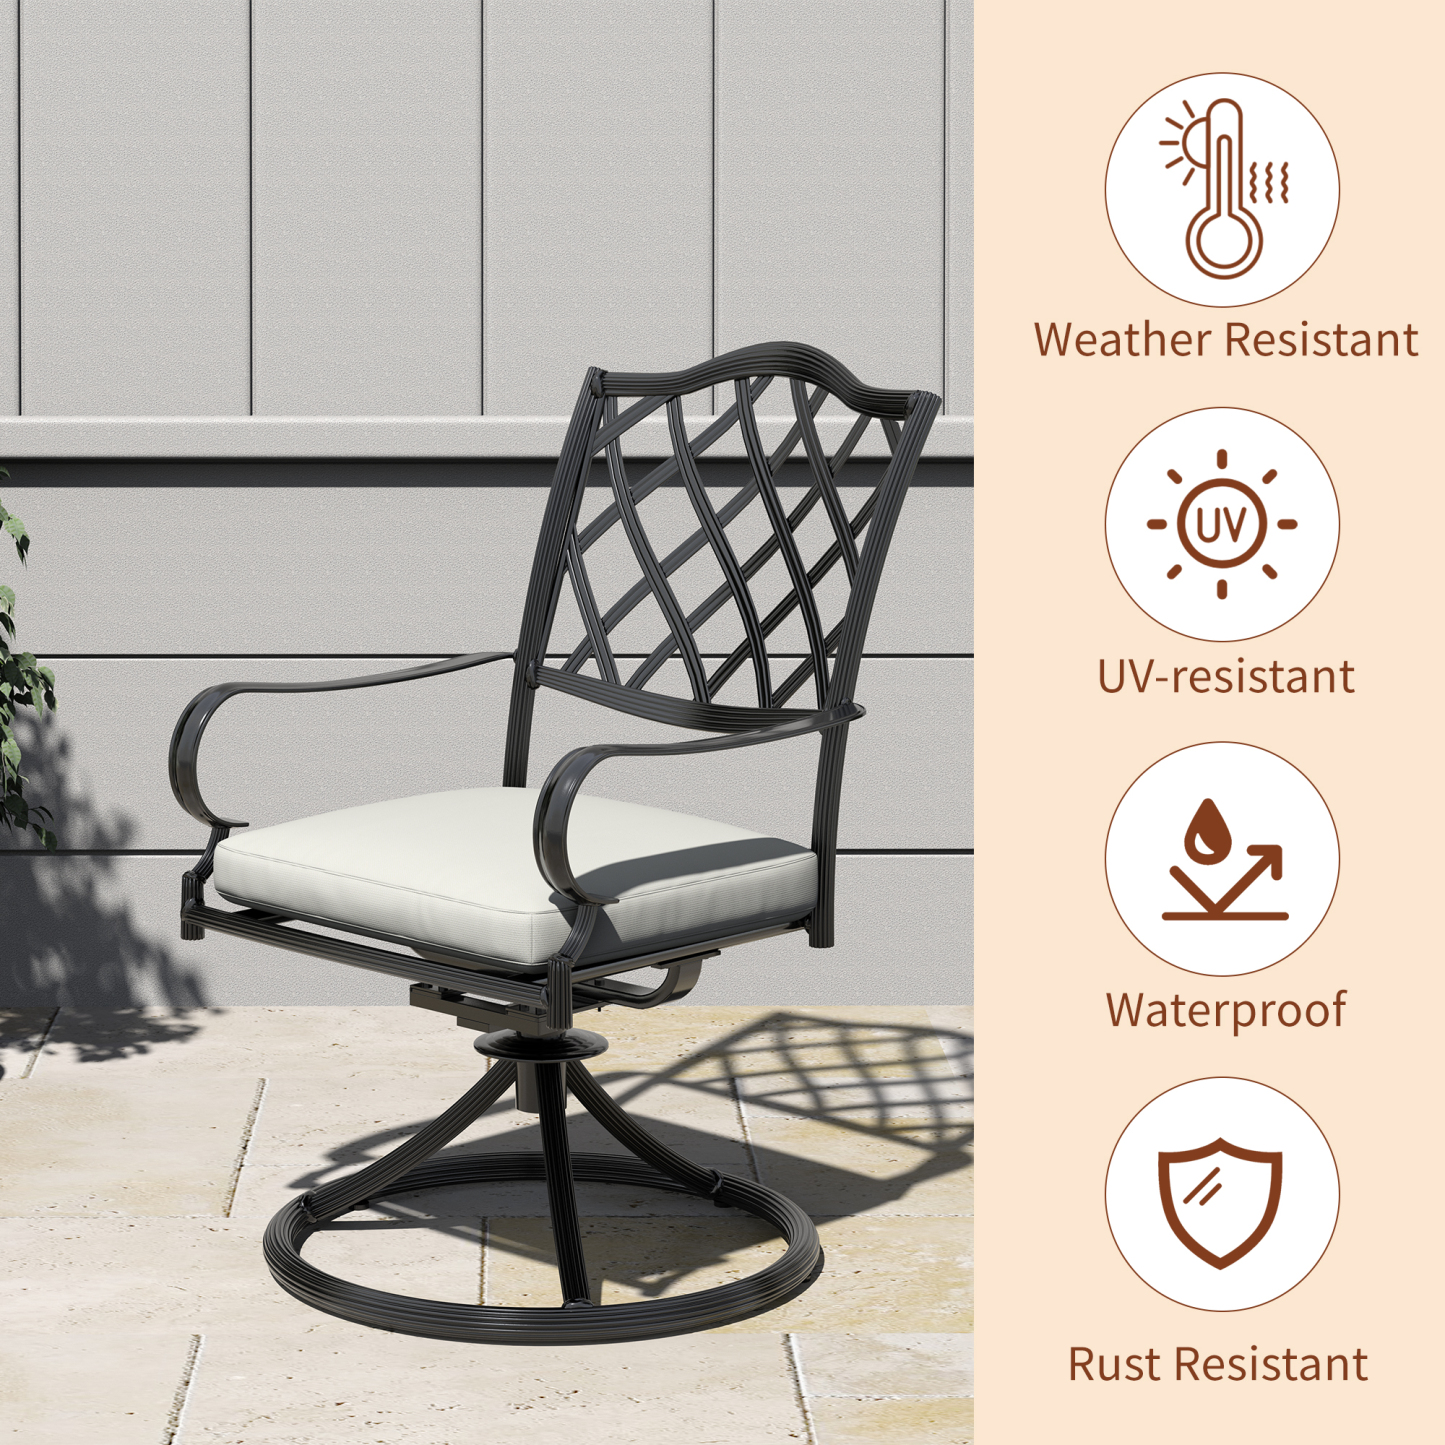 Mondawe 7 Piece Outdoor Retro Dining Set with Cushions 6 Piece Swivel Dining Chairs and 1 Porcelain Round Table for Patio Lawn Garden